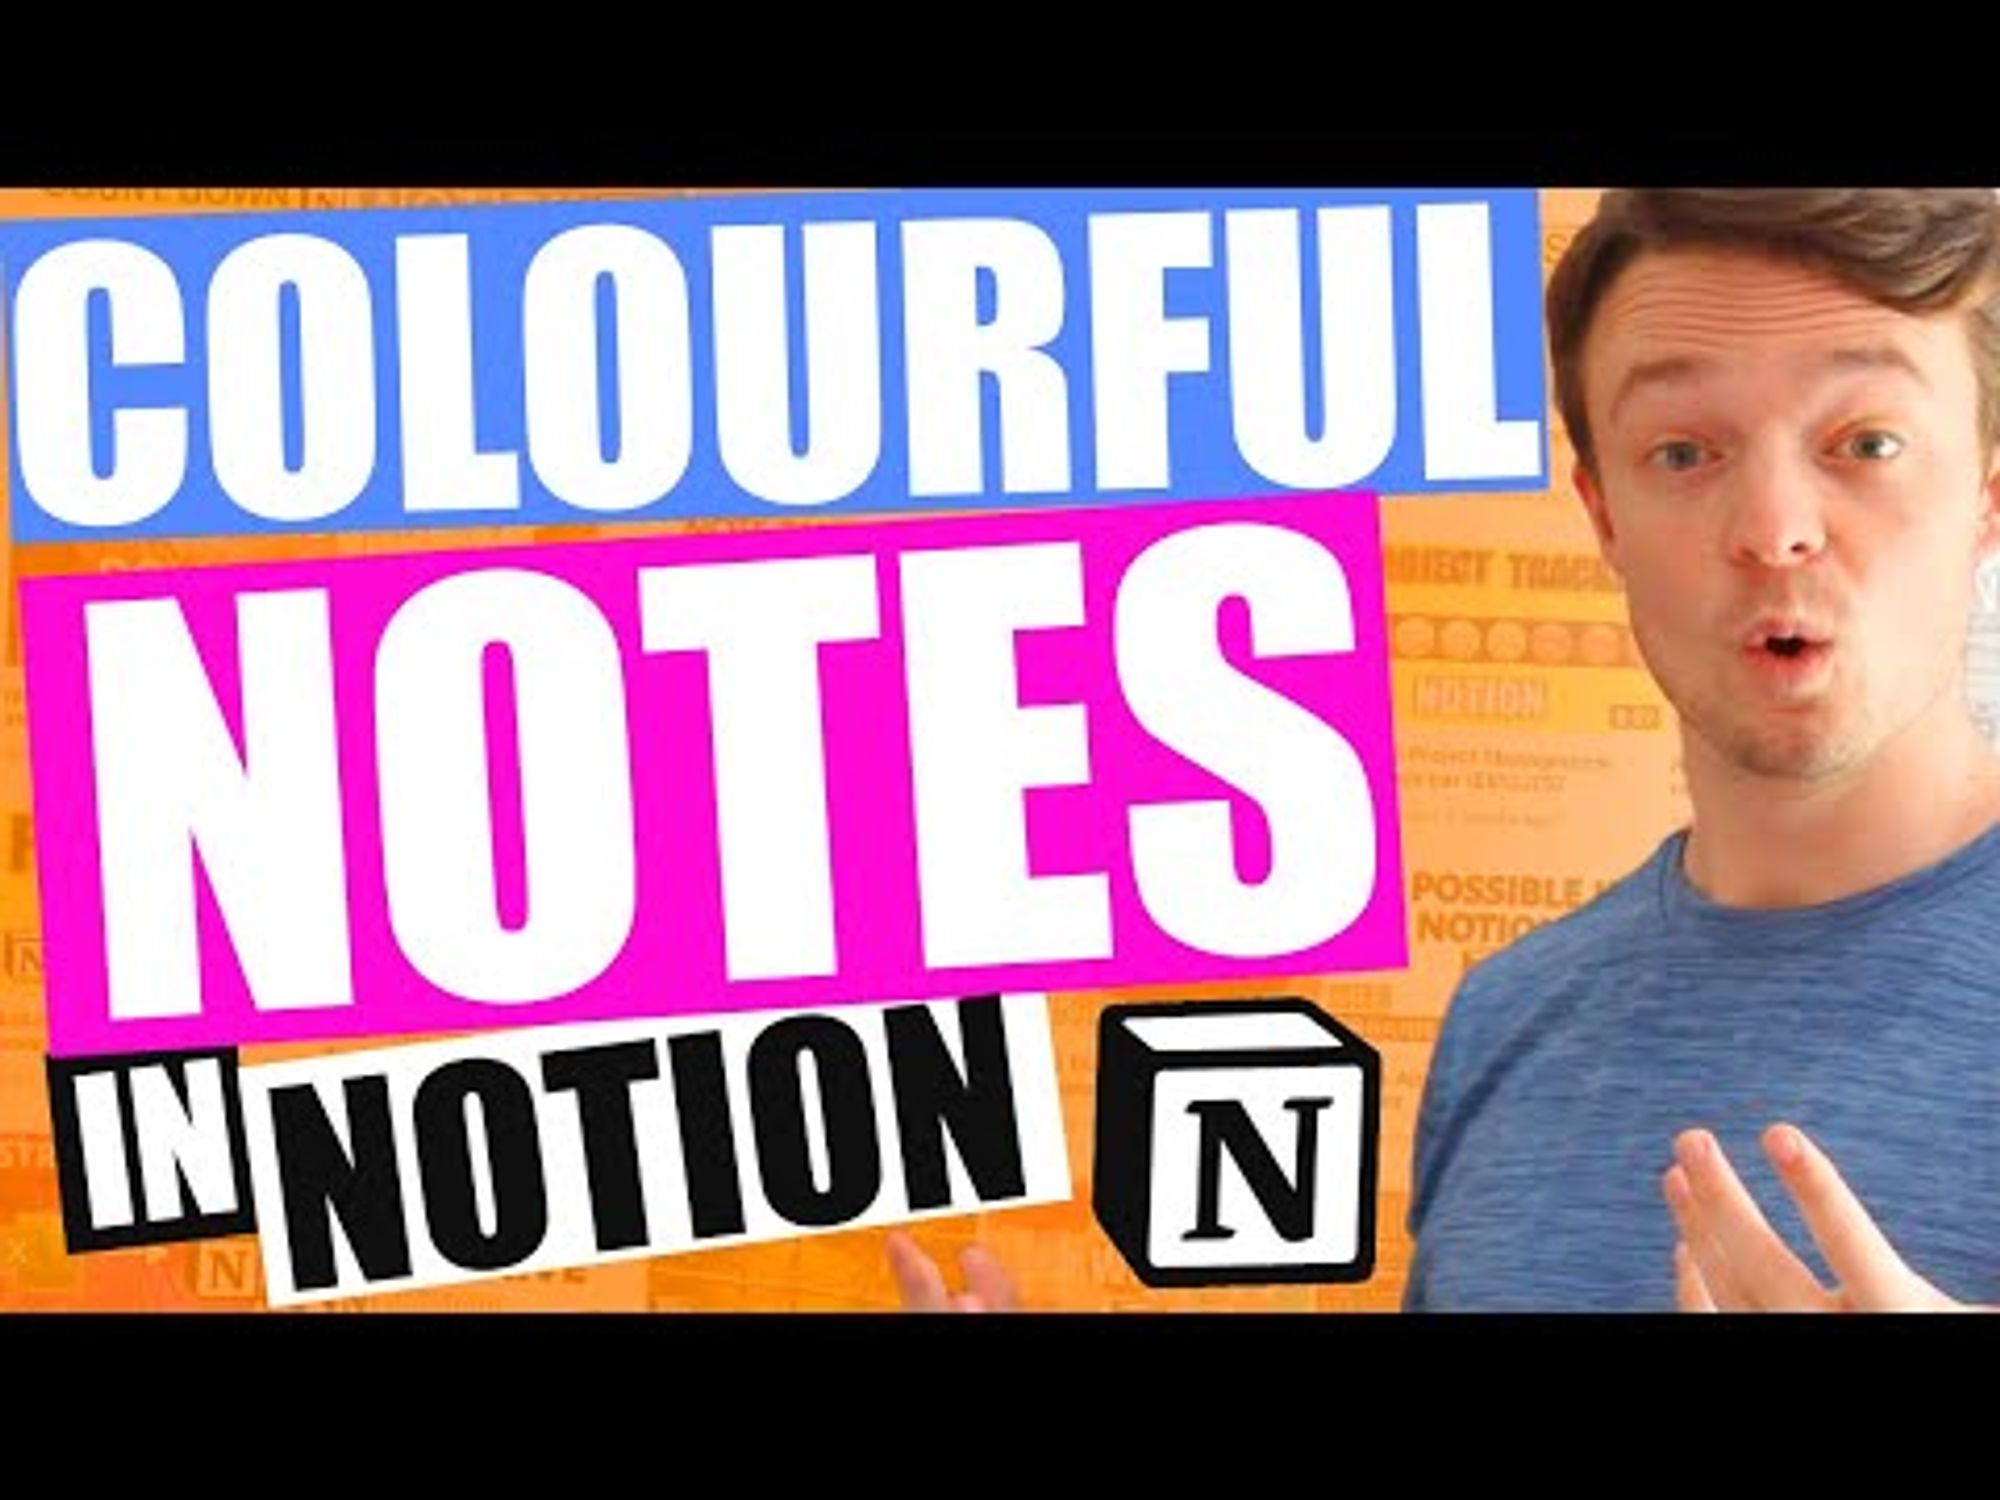 Colourful Notes in Notion